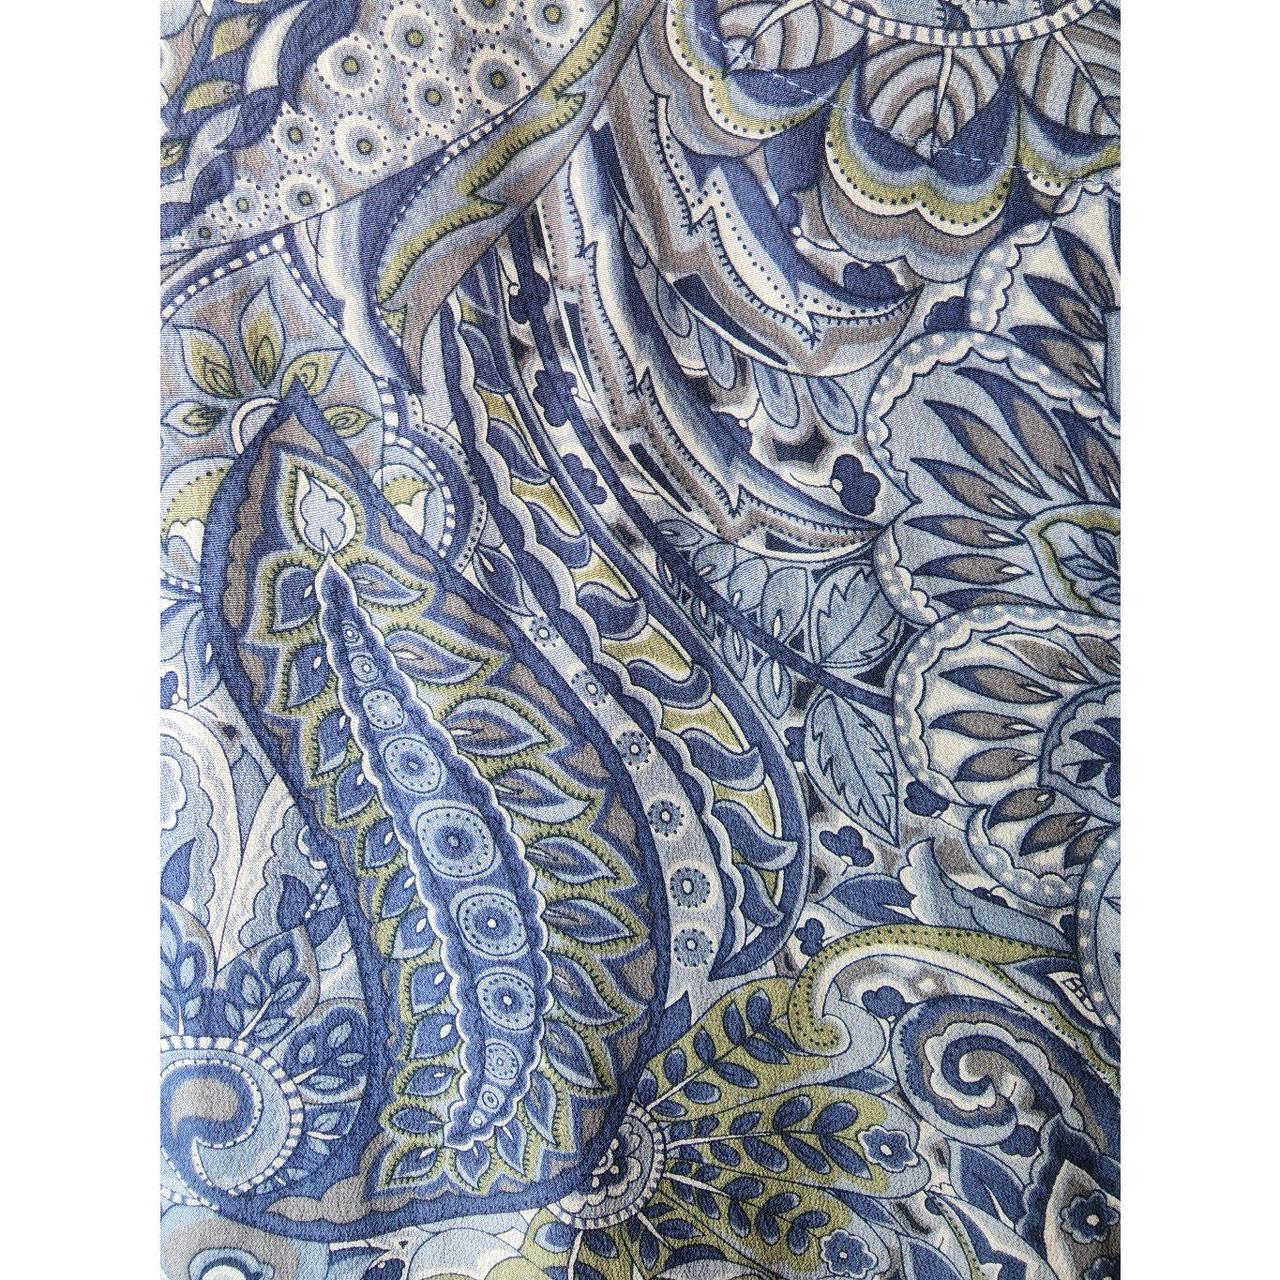 Product Image 3 - Blue, green, white
100% Silk
Paisley print
90s